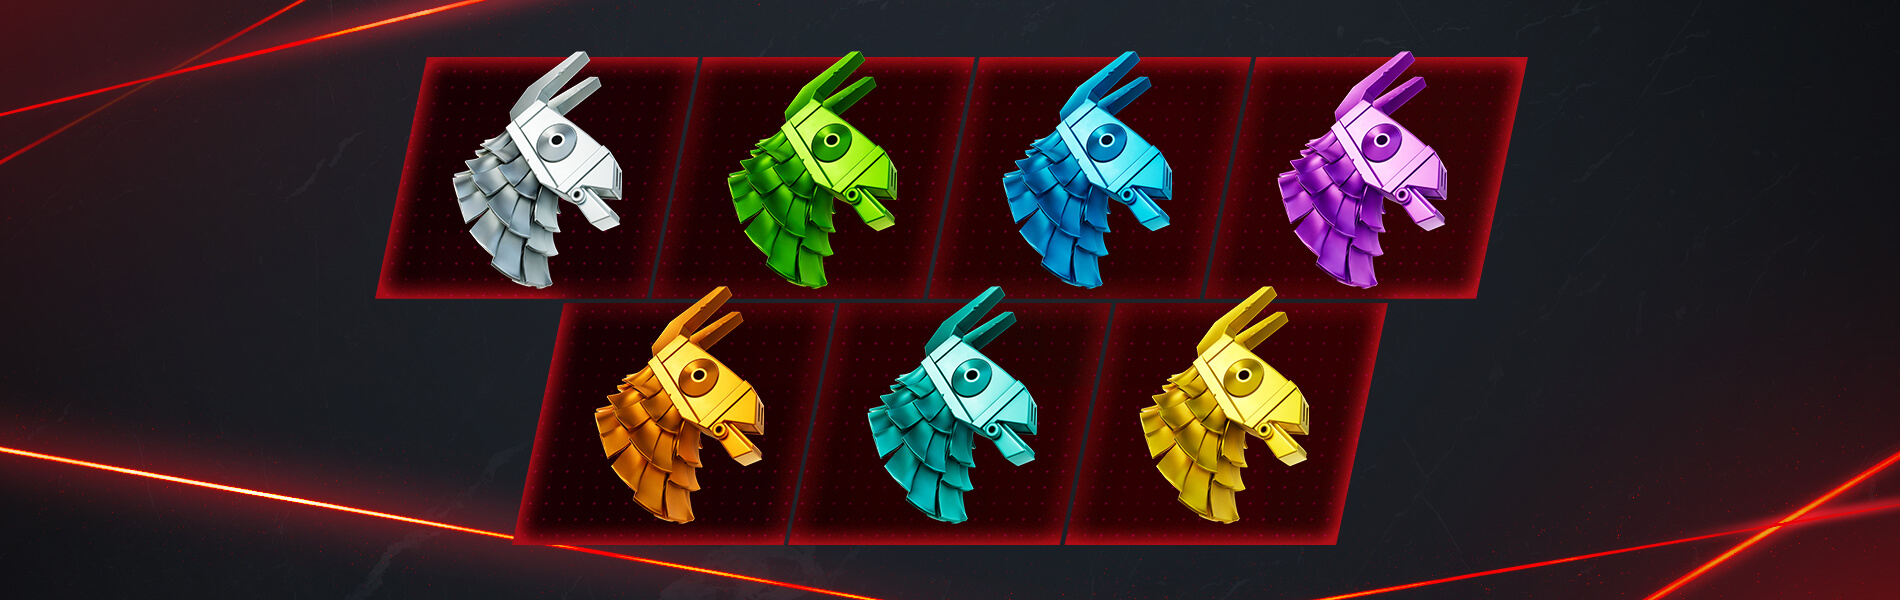 All seven styles of the Precious Lama backpack in Fortnite.